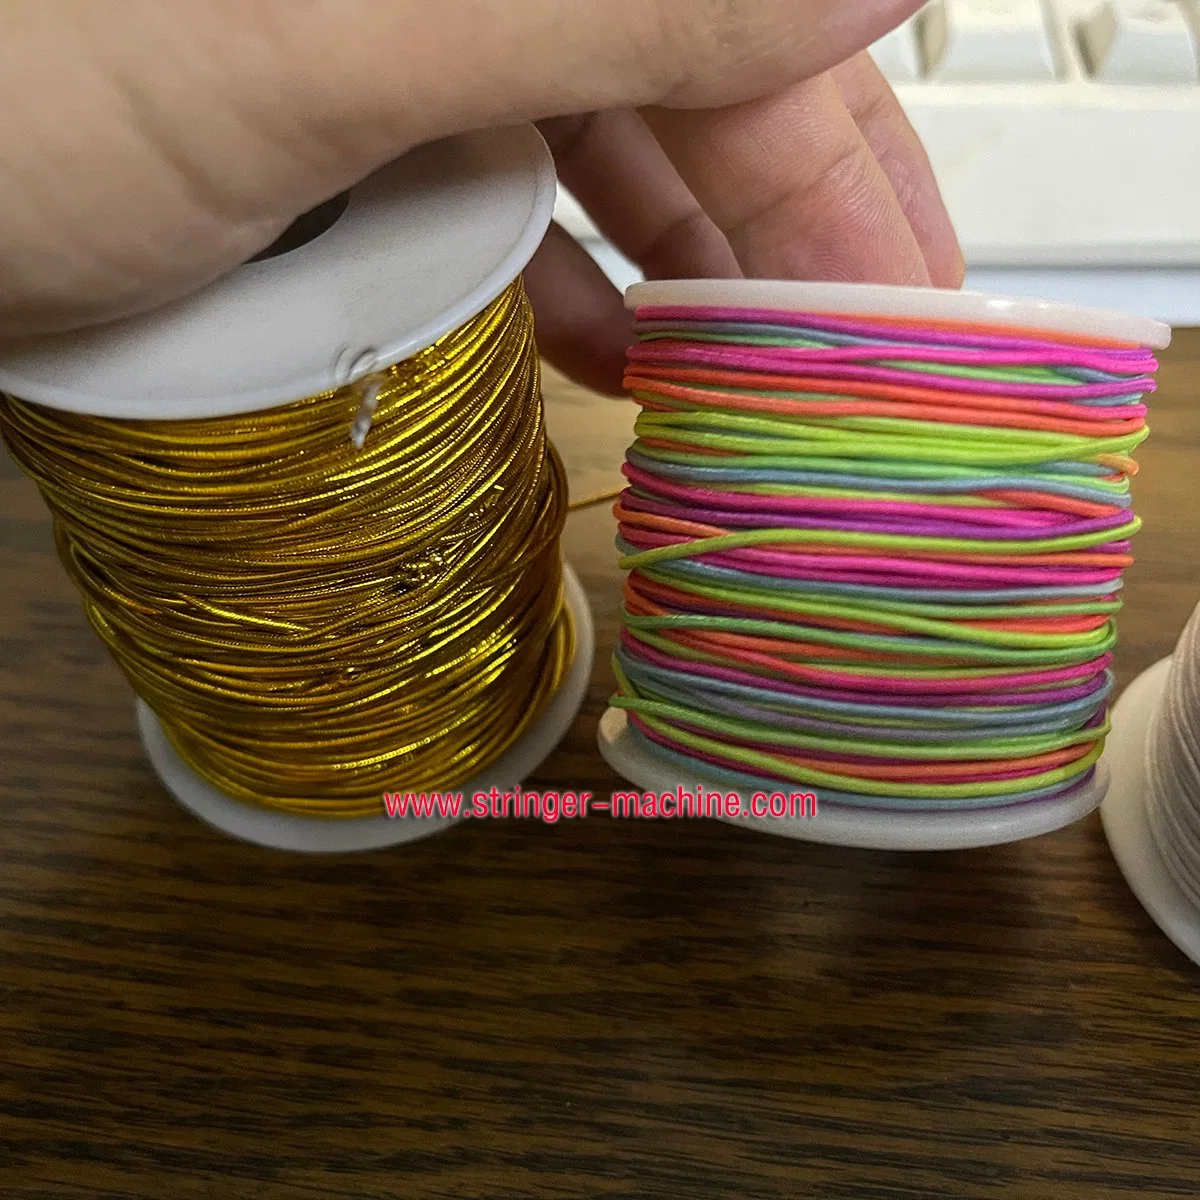 Wholesale/Supplier Braided Elastic/ Polyester/ Cotton/ PP/ Polypropylene/ Nylon Cord/ Rope 3mm 6mm 8mm